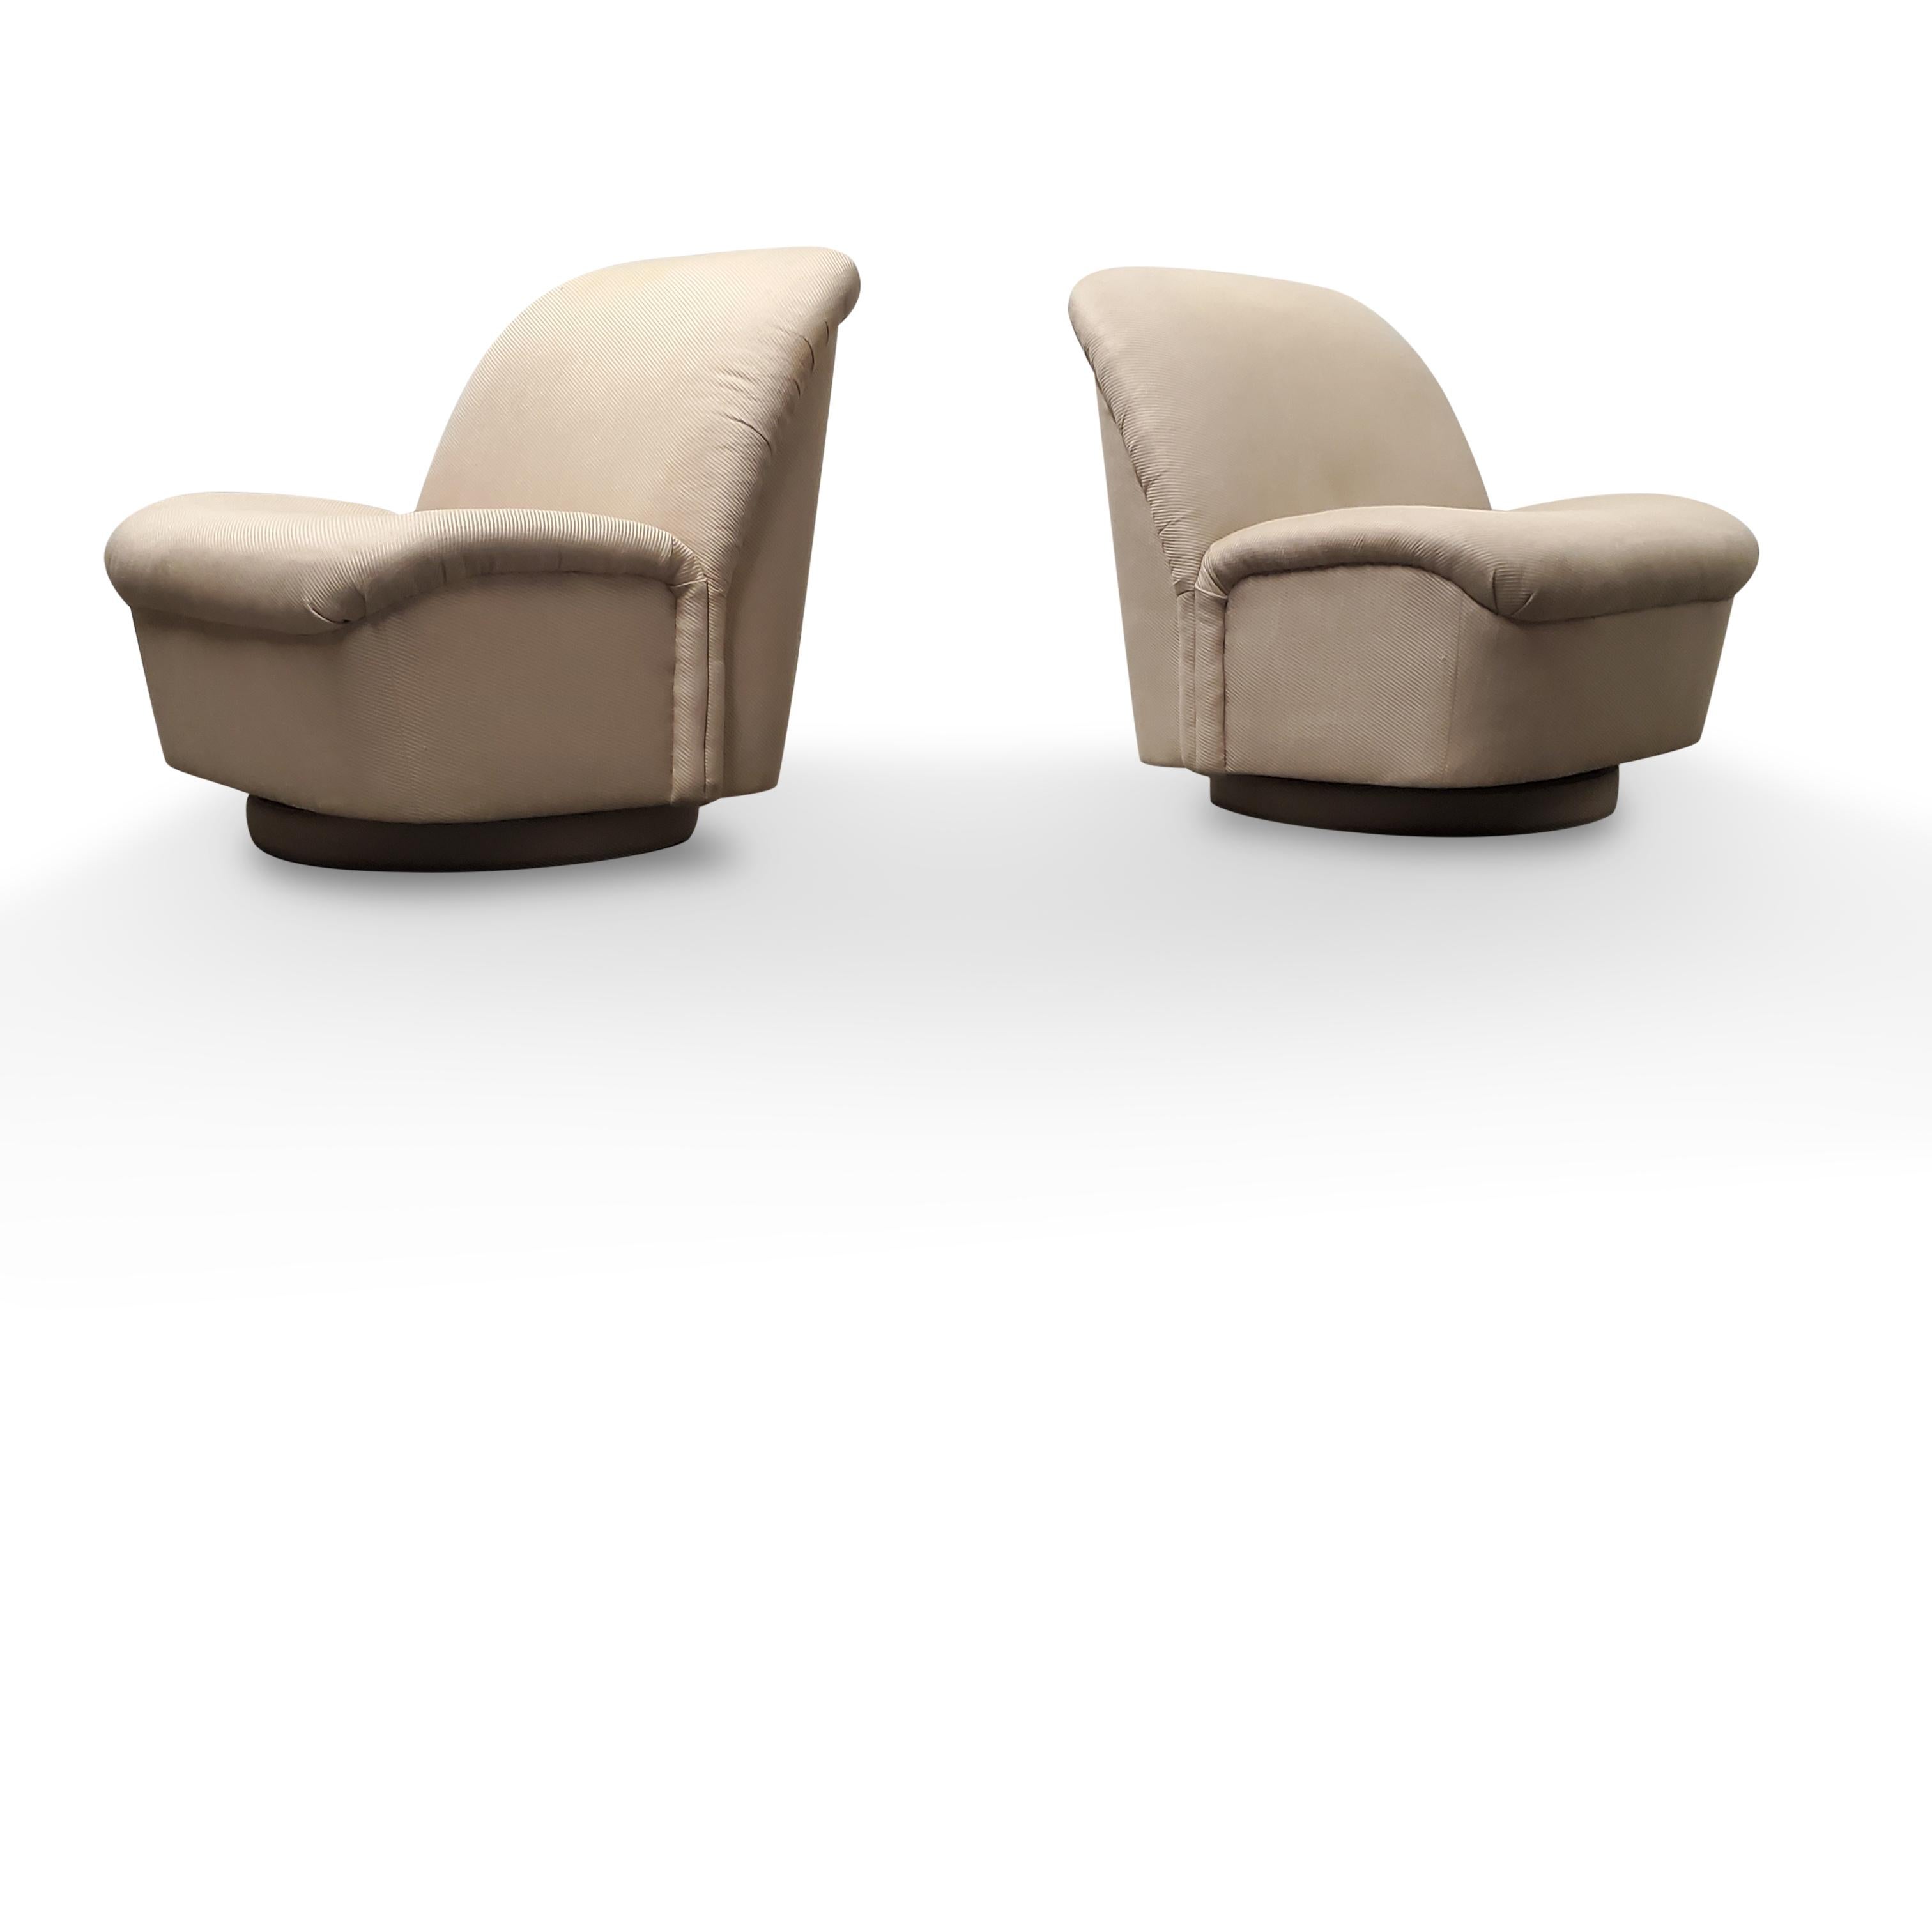 Pair of Signed Directional Swivel / Tilt lounge chairs.